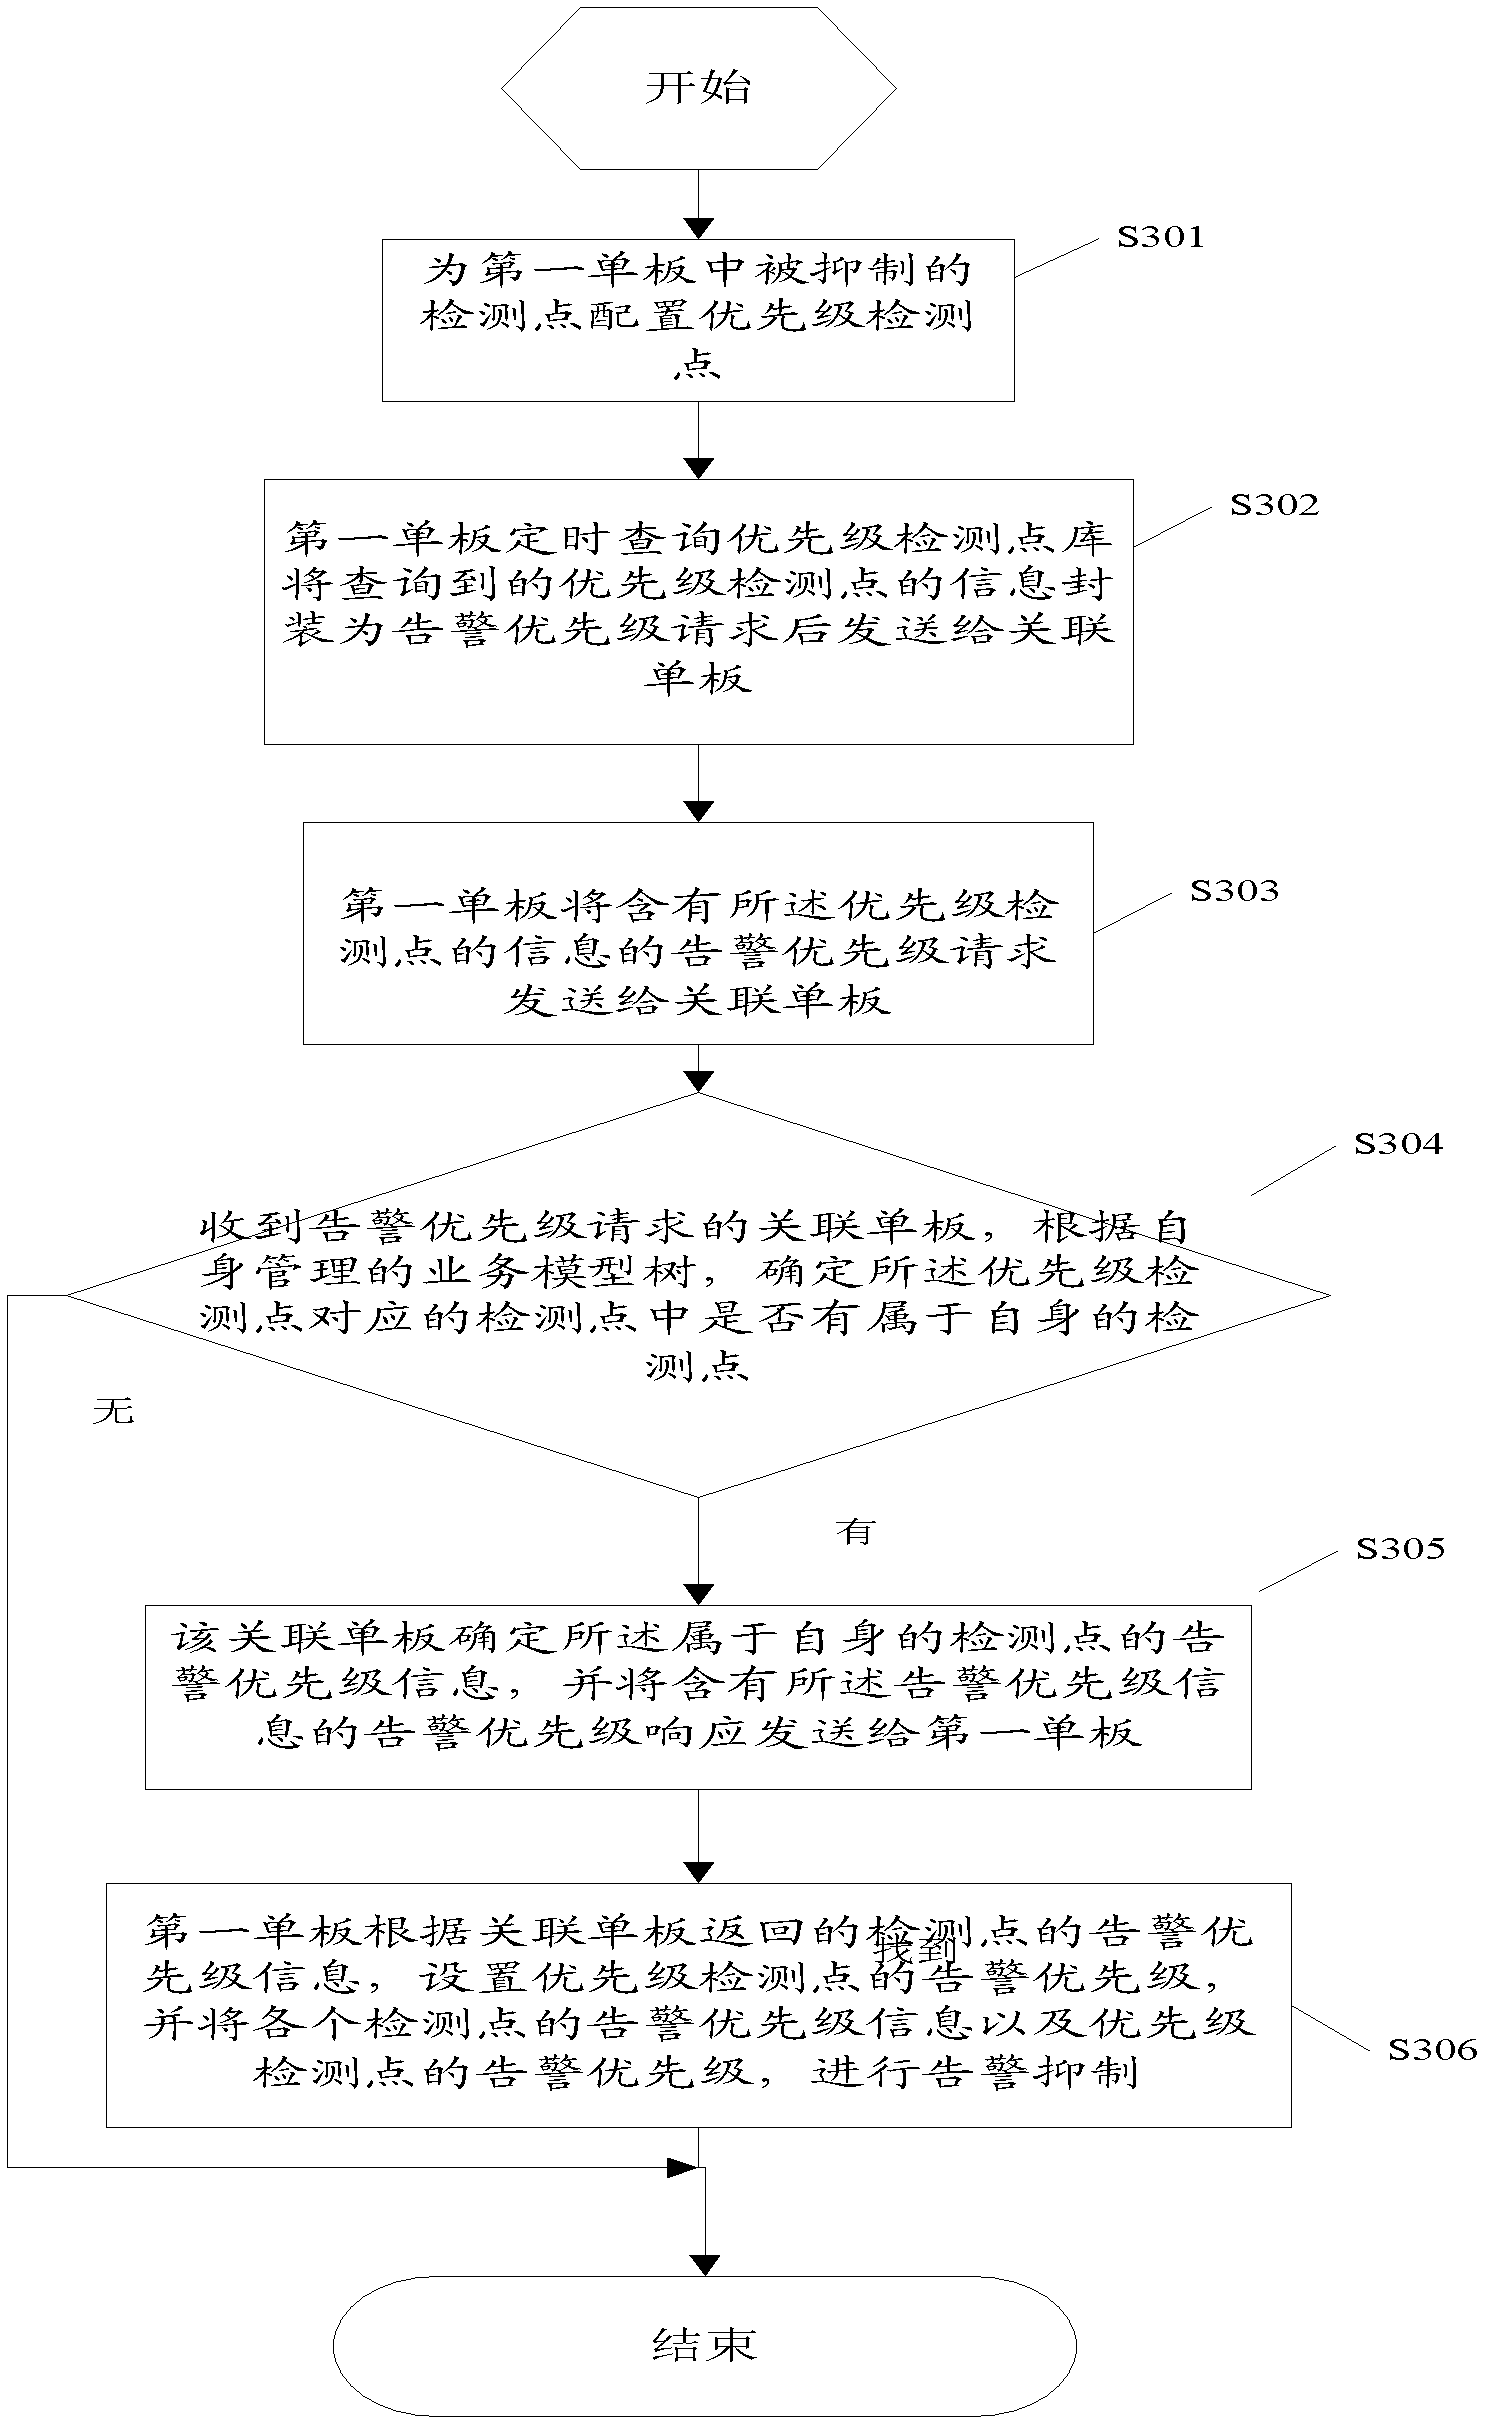 Method and system for suppressing inter-plate alarming priority